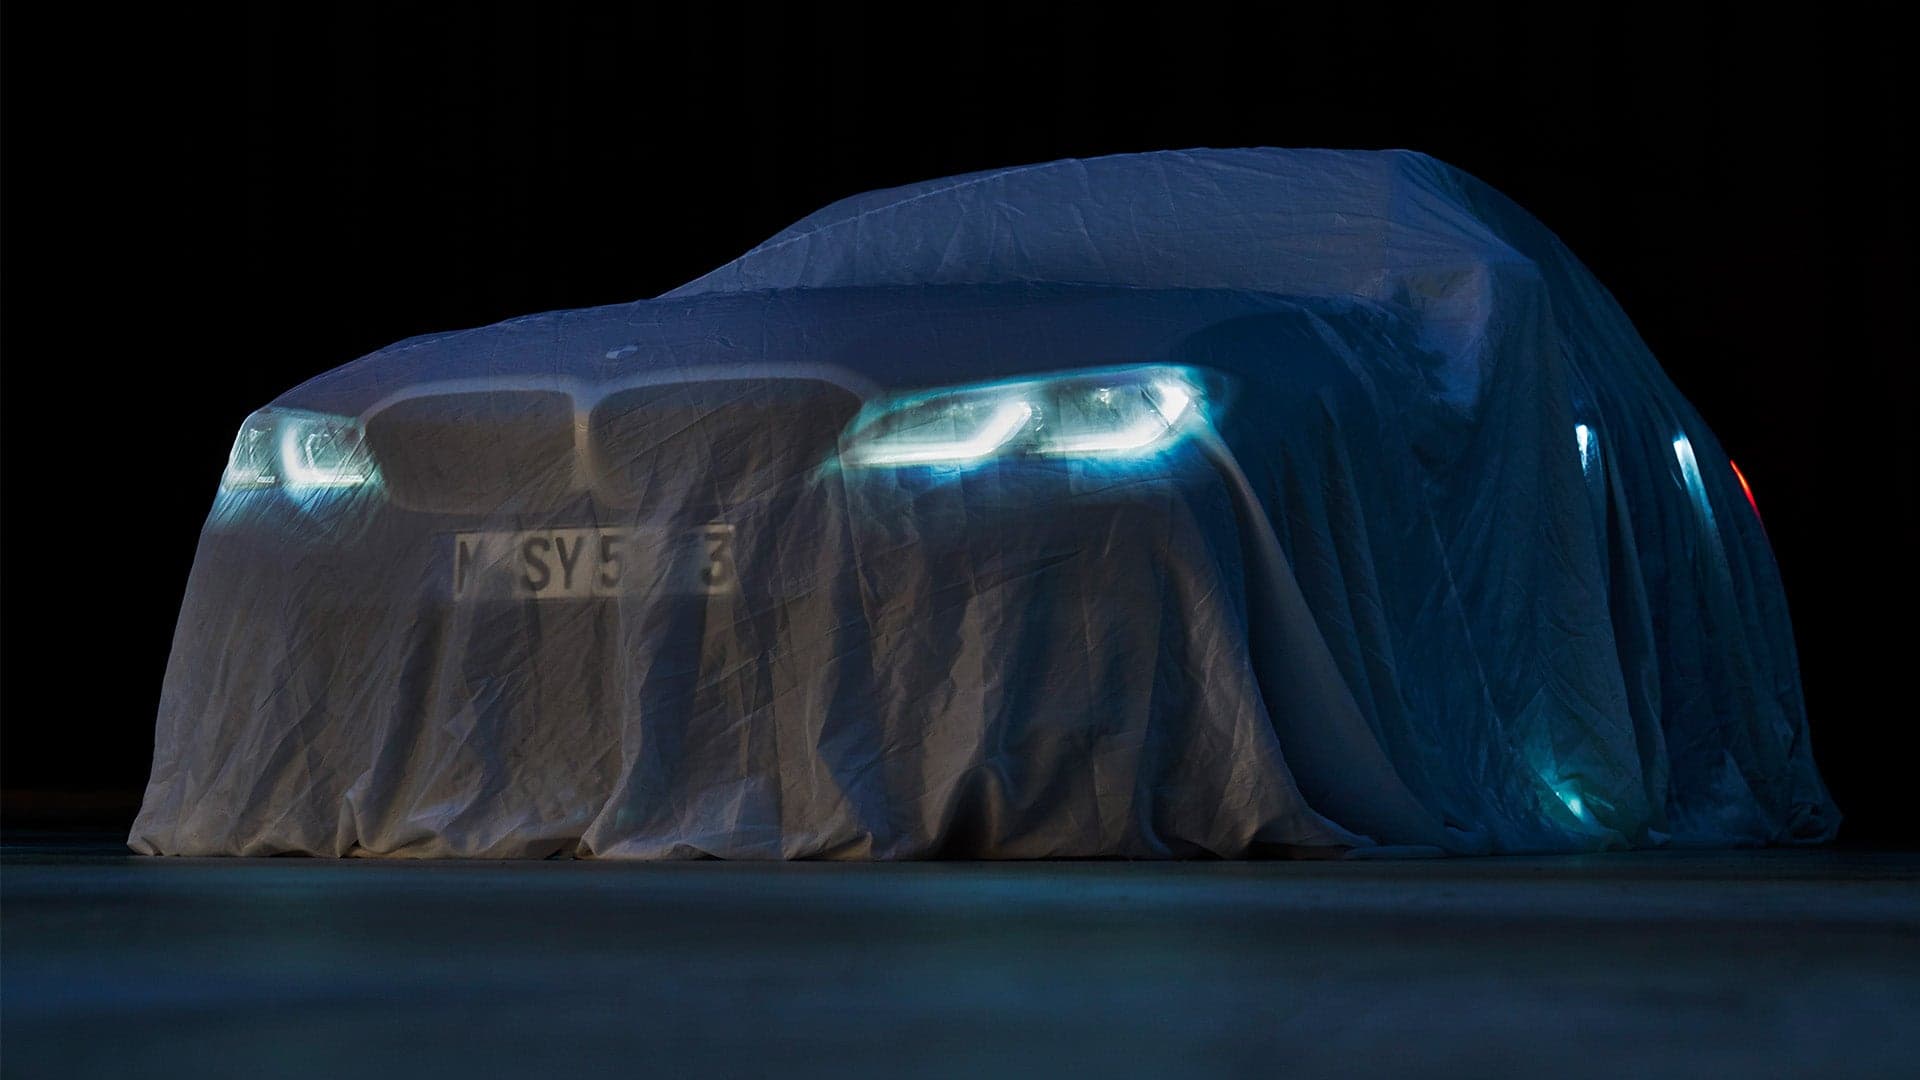 BMW Will Unveil the All-New 3 Series at Paris Motor Show Next Week